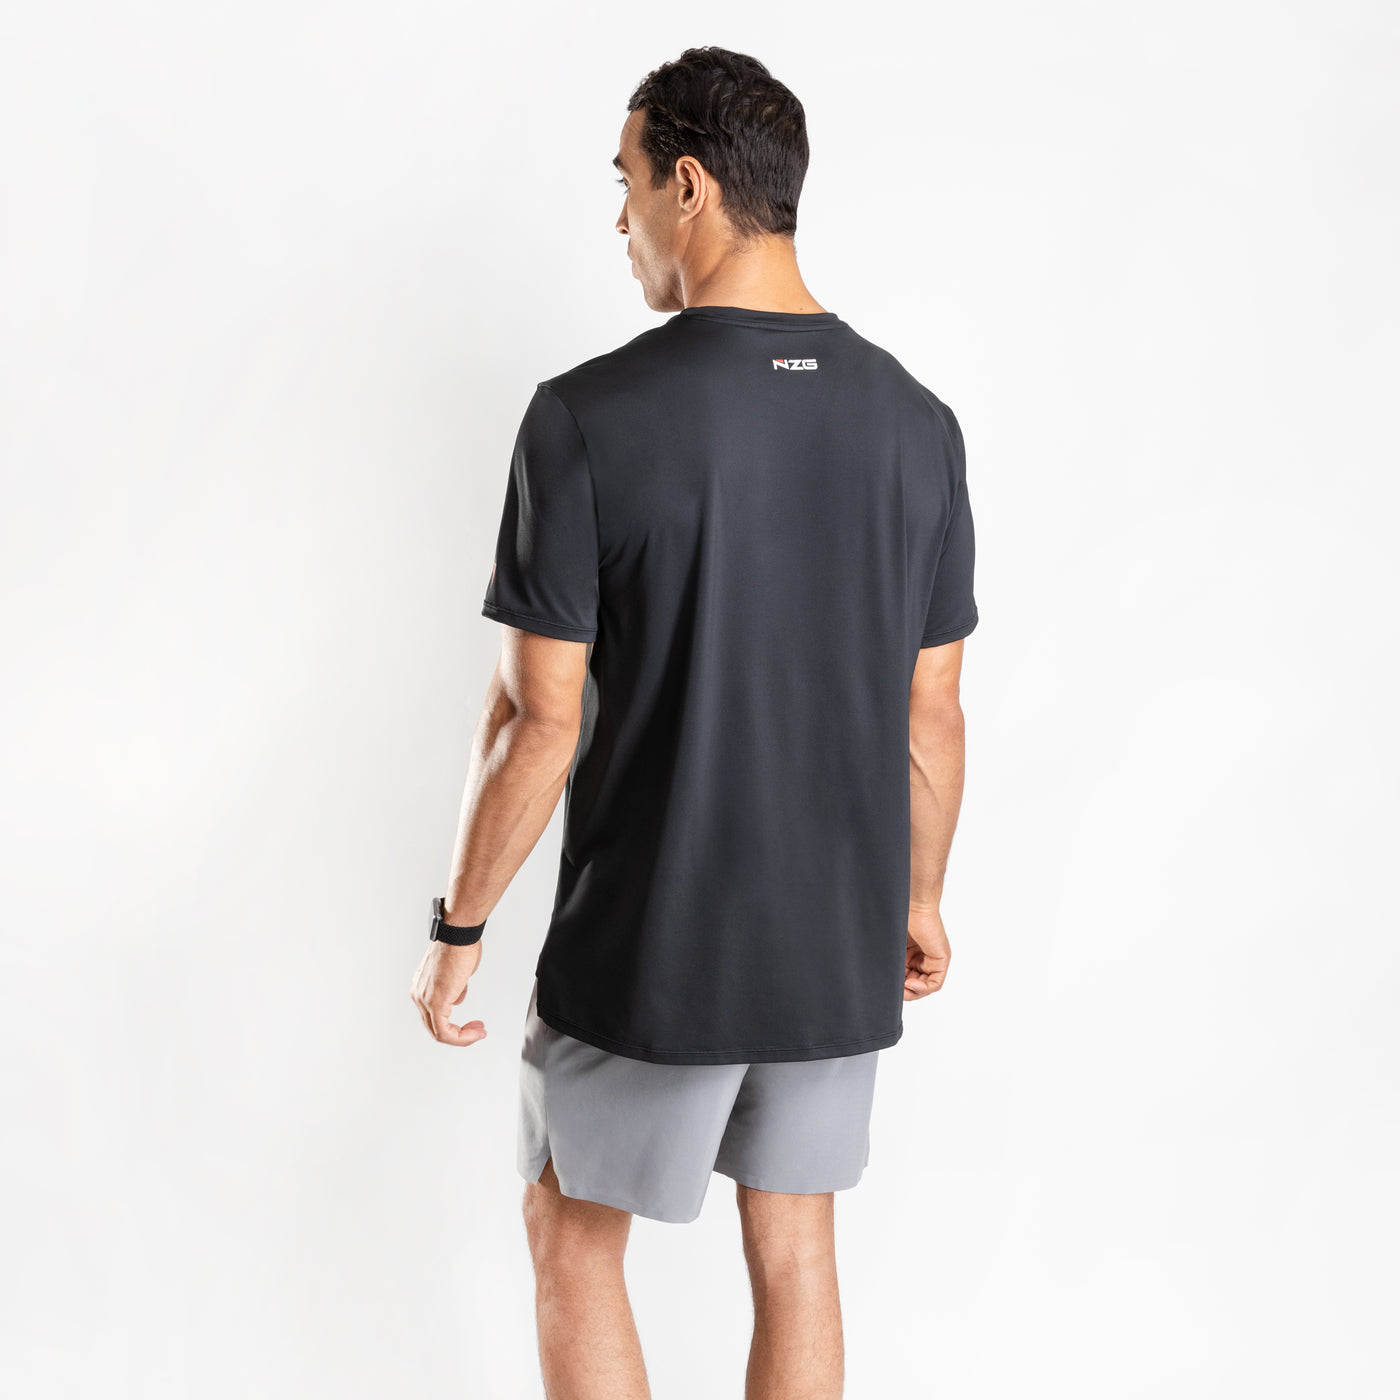 NonZero Gravity Men’s ZinTex Workout T-Shirt made with Super Stretch Polyester & Spandex in Coal 